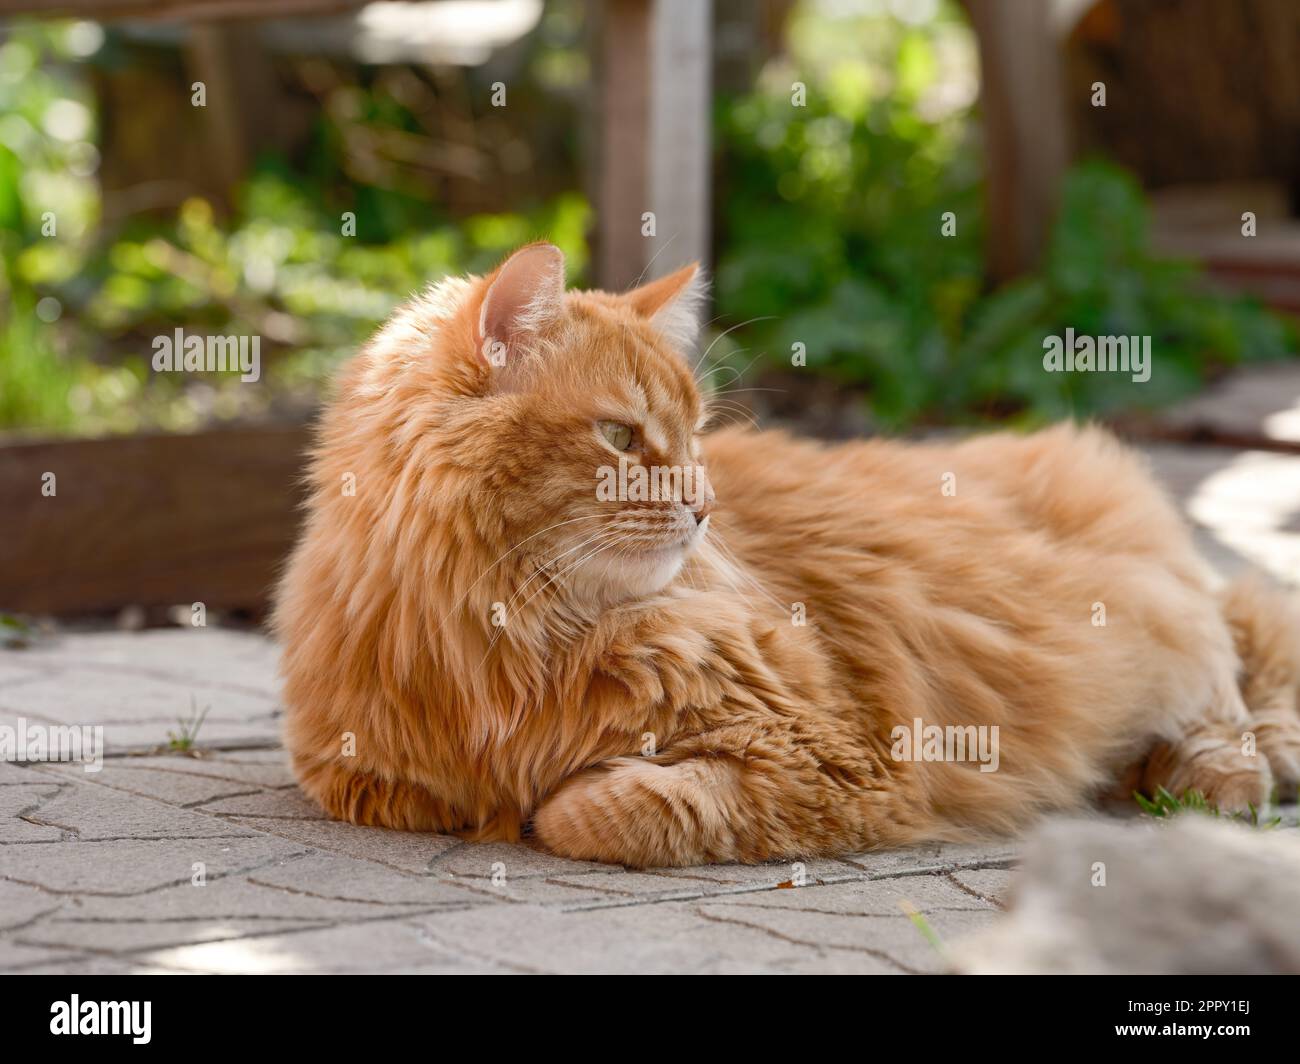 A ginger cat lying in a garden on a tiled path. Close up. Stock Photo